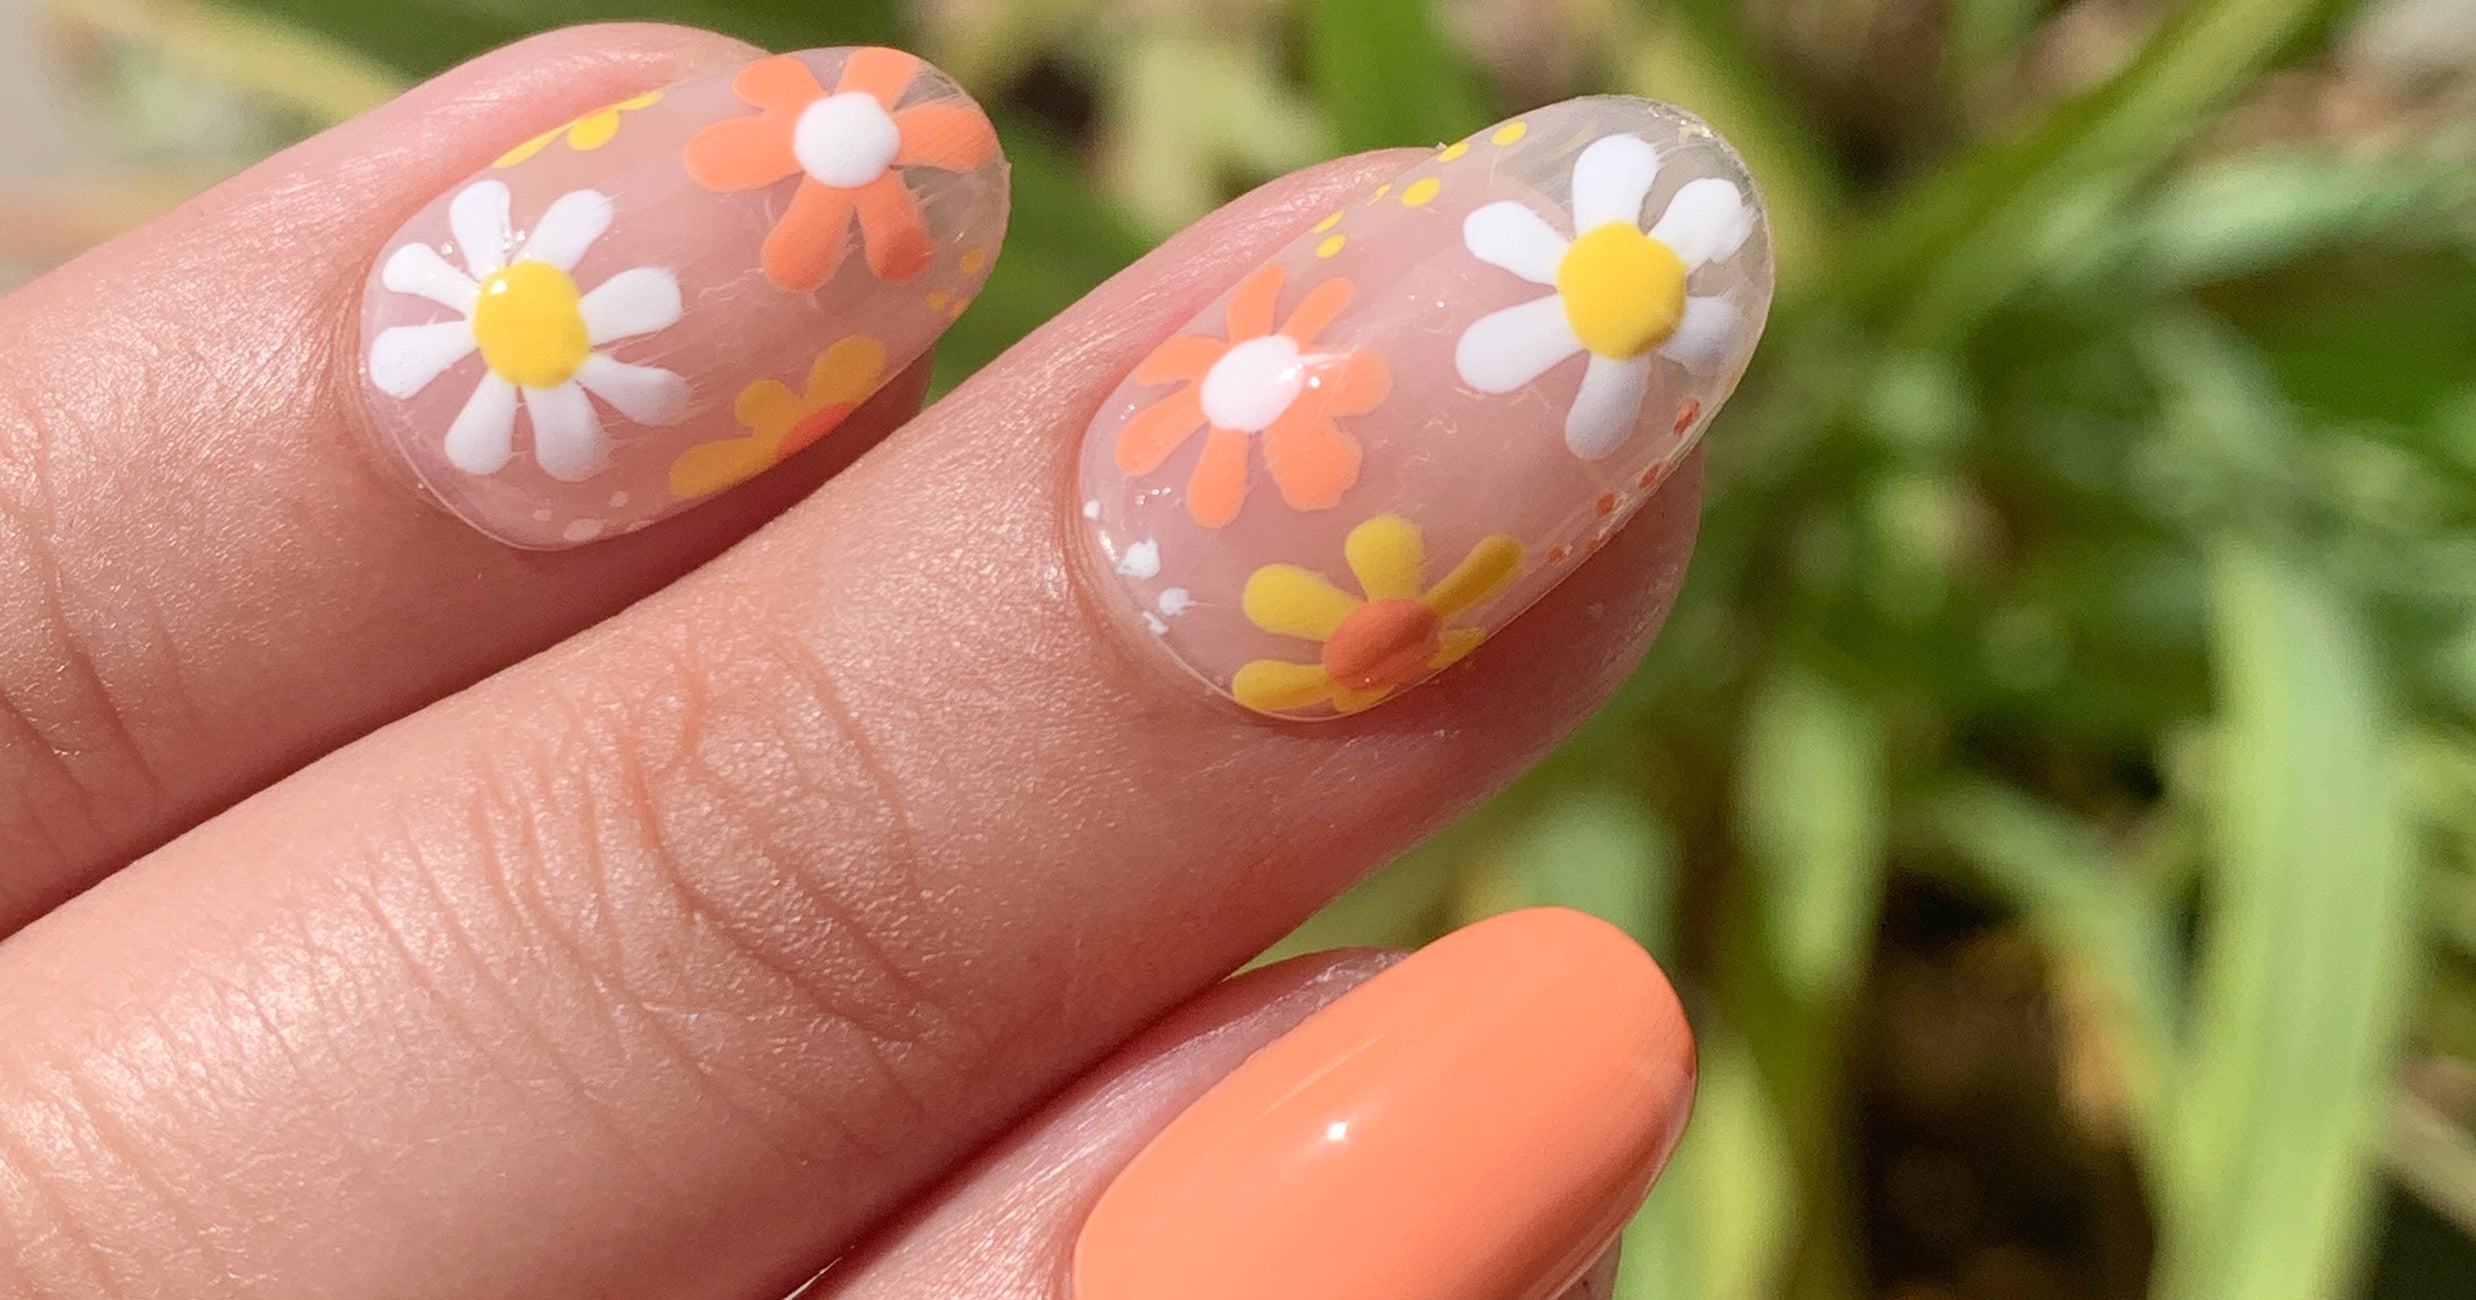 3. Quick and Easy Nail Art Tutorials - wide 9